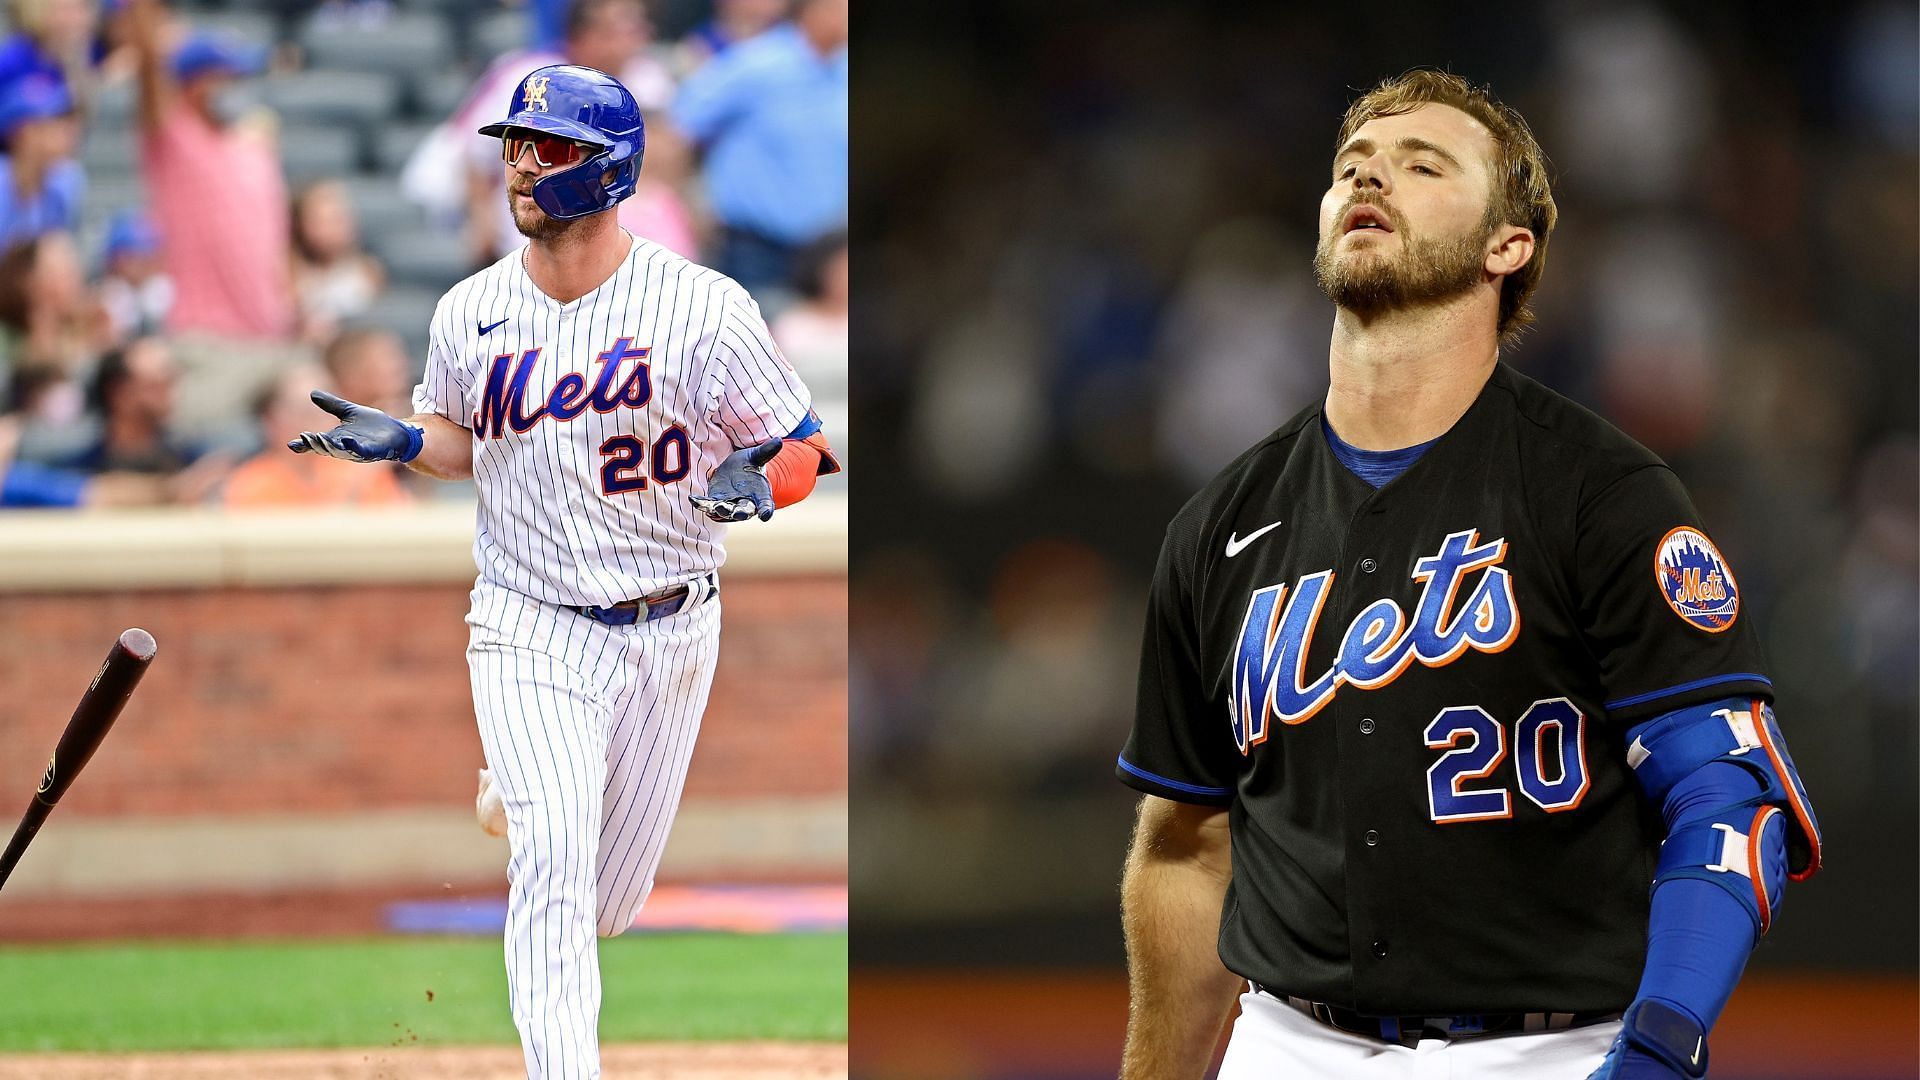 Uncertain times ahead for Pete Alonso